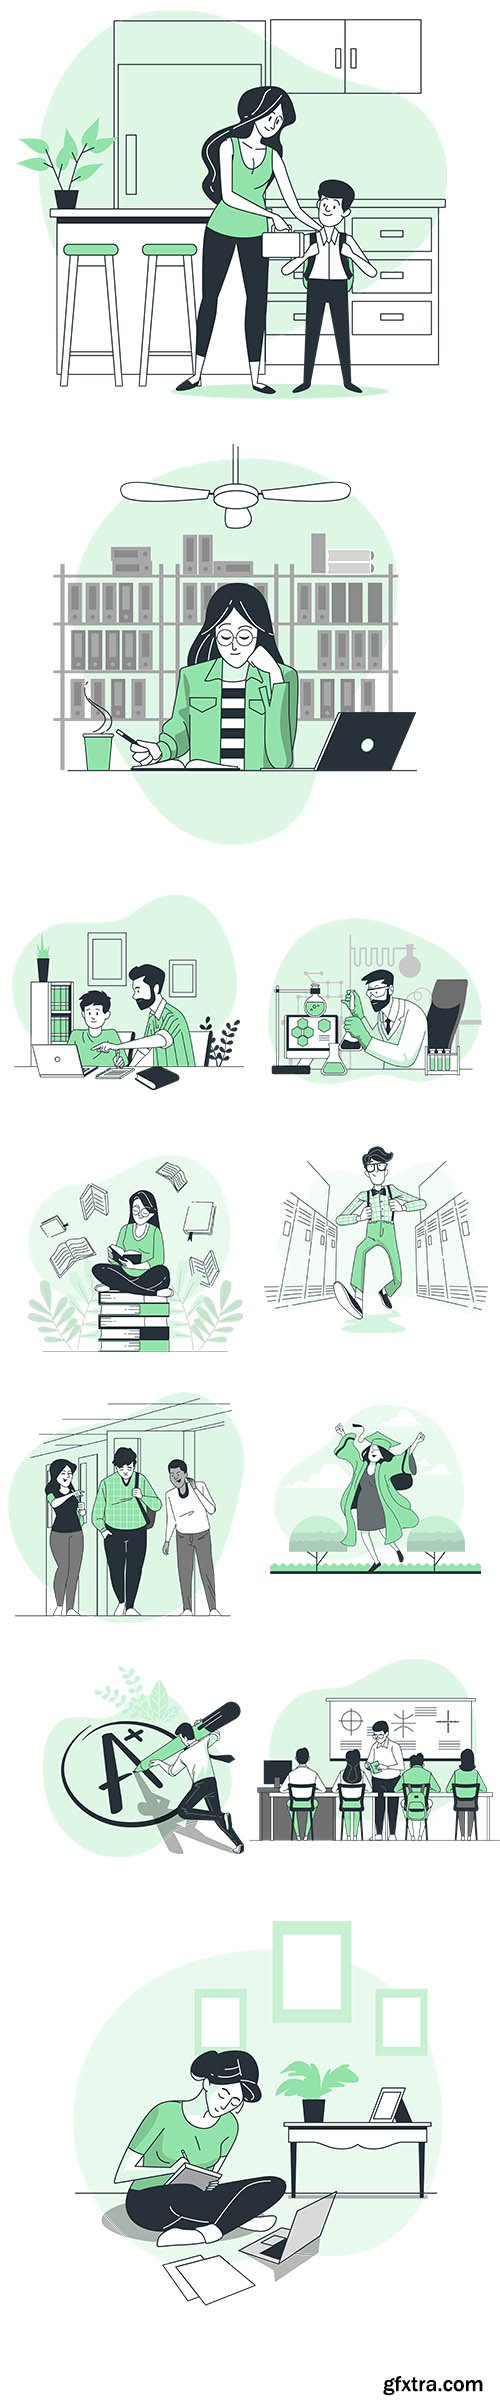 Vector People Live Situation Illustrations Education Concept Vol 8